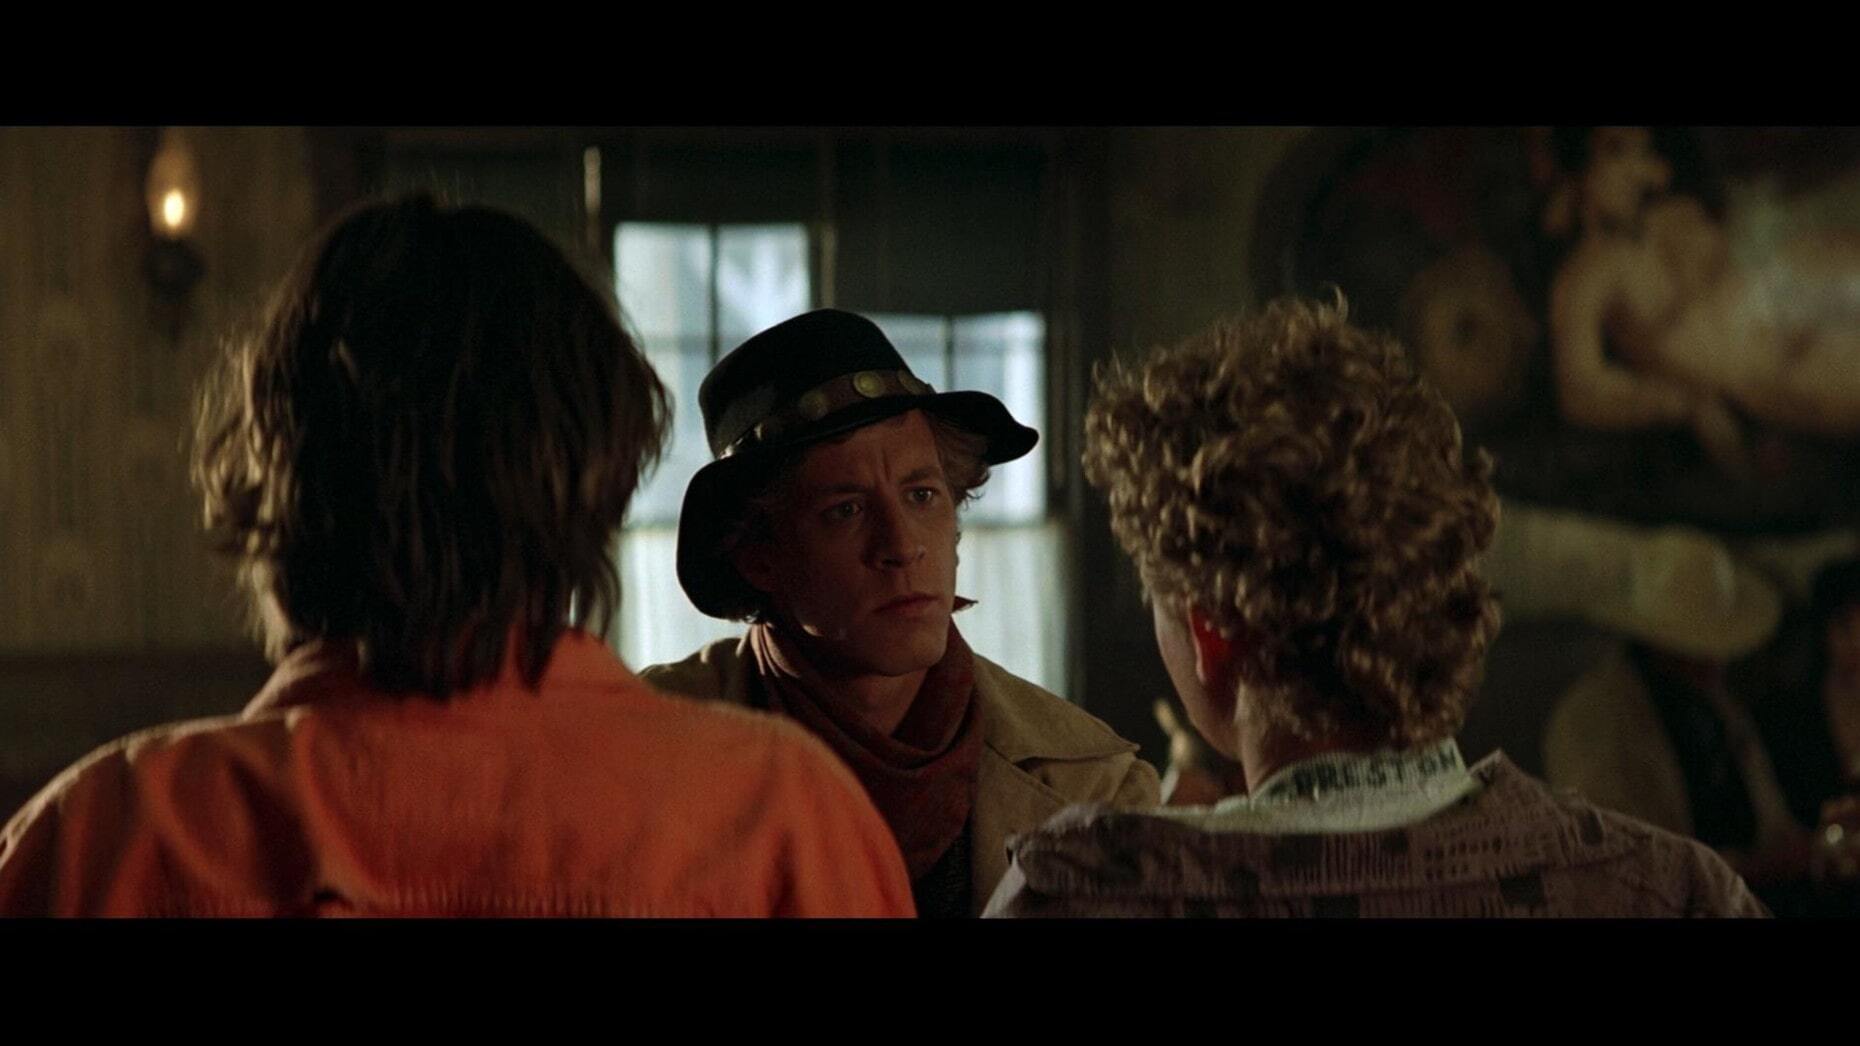 <p>Easily the funniest appearance of the character of Billy the Kid comes in the 1989 sci-fi comedy <a href="https://www.imdb.com/title/tt0096928/?ref_=nv_sr_srsg_0"><em>Bill & Ted's Excellent Adventure</em></a><em>. </em>The titular characters travel through time to <a href="https://www.youtube.com/watch?v=E3g8Unc-oe4" title="https://www.youtube.com/watch?v=E3g8Unc-oe4">gather historical figures</a> for their high school history presentation, including Billy the Kid—played by <a href="https://www.imdb.com/name/nm0794890/?ref_=tt_cl_t_5" title="https://www.imdb.com/name/nm0794890/?ref_=tt_cl_t_5">Dan Shor</a>—who helps them on their quest through the past and future.</p>